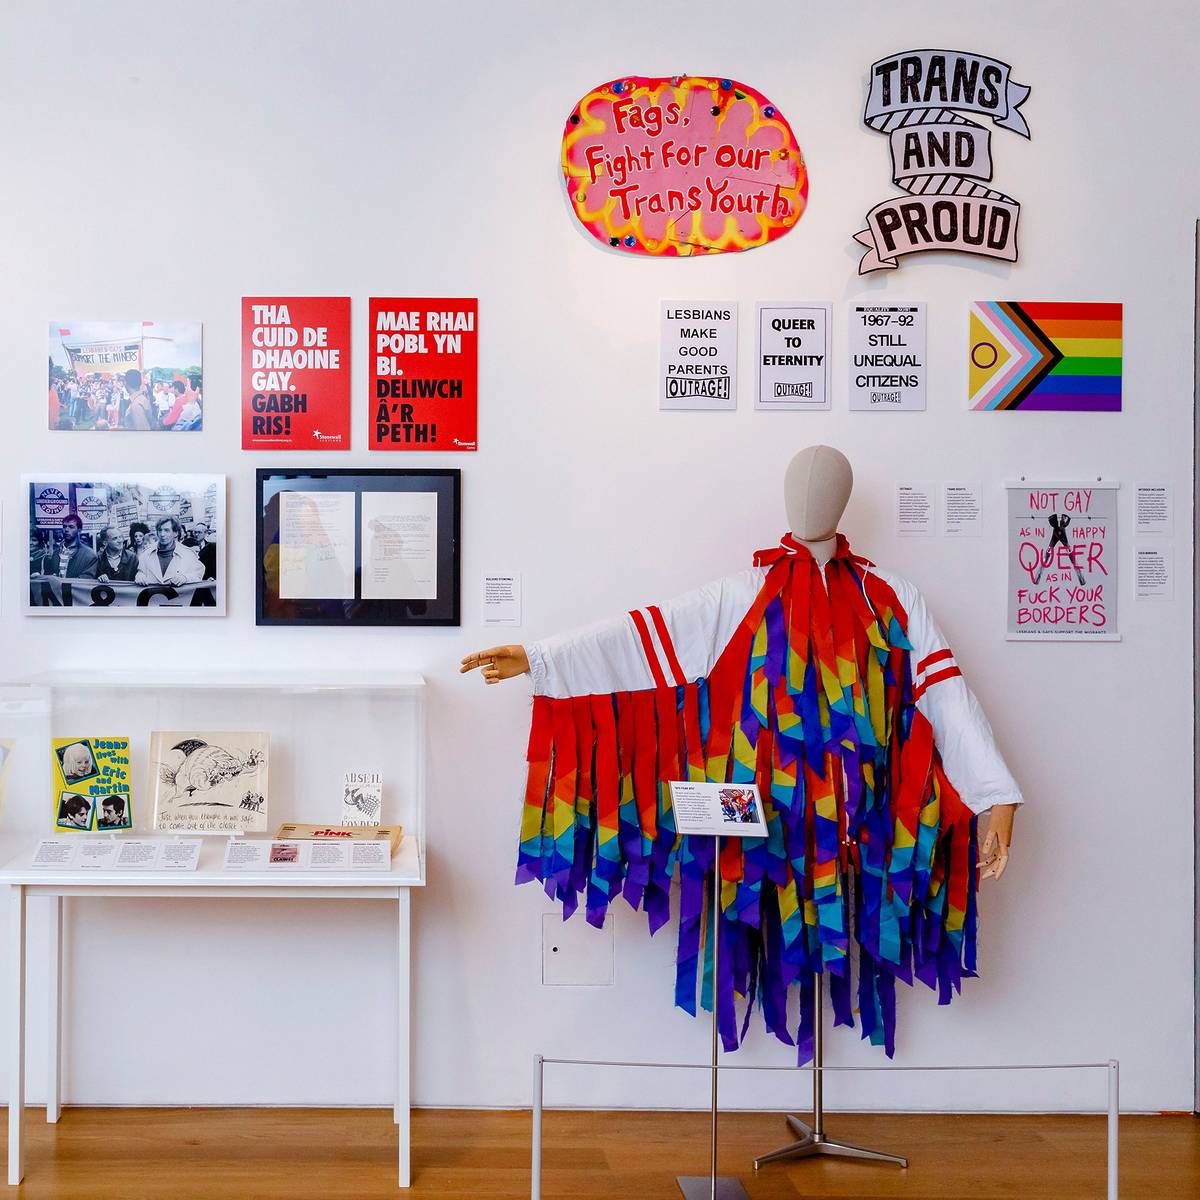 Exhibition space at Queer Britain, the UK's first-ever LGBTQ+ museum.